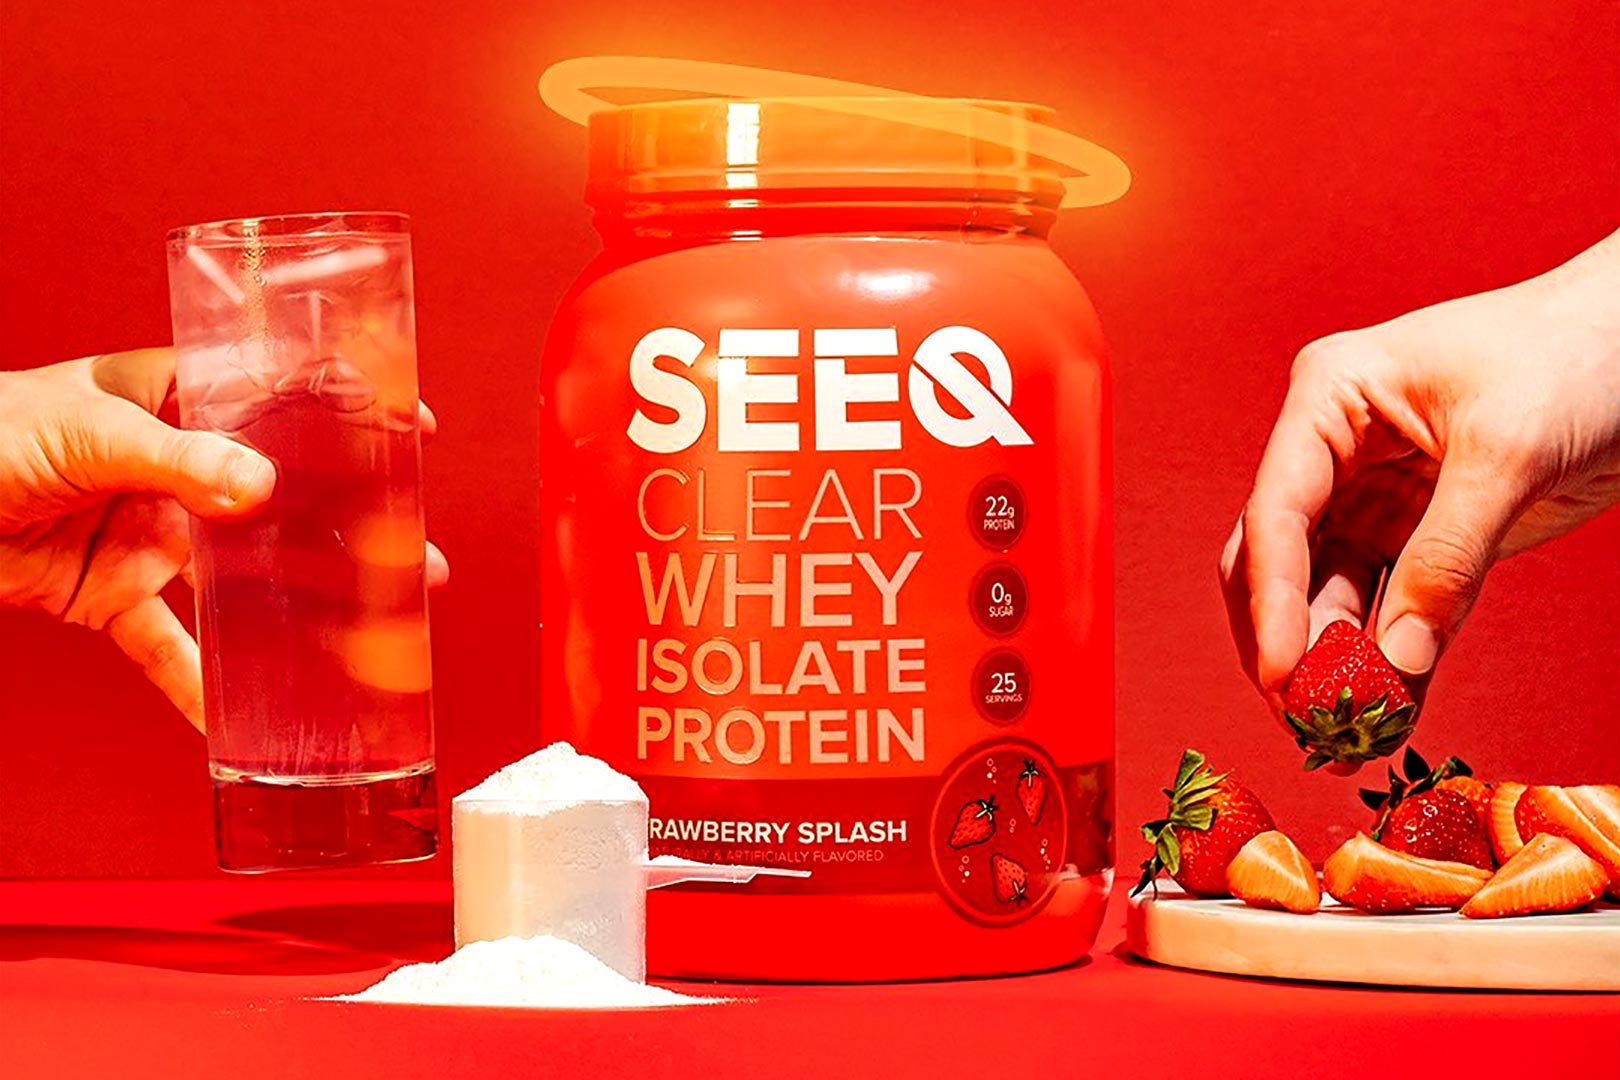 Seeq Strawberry Splash Clear Whey Isolate Protein